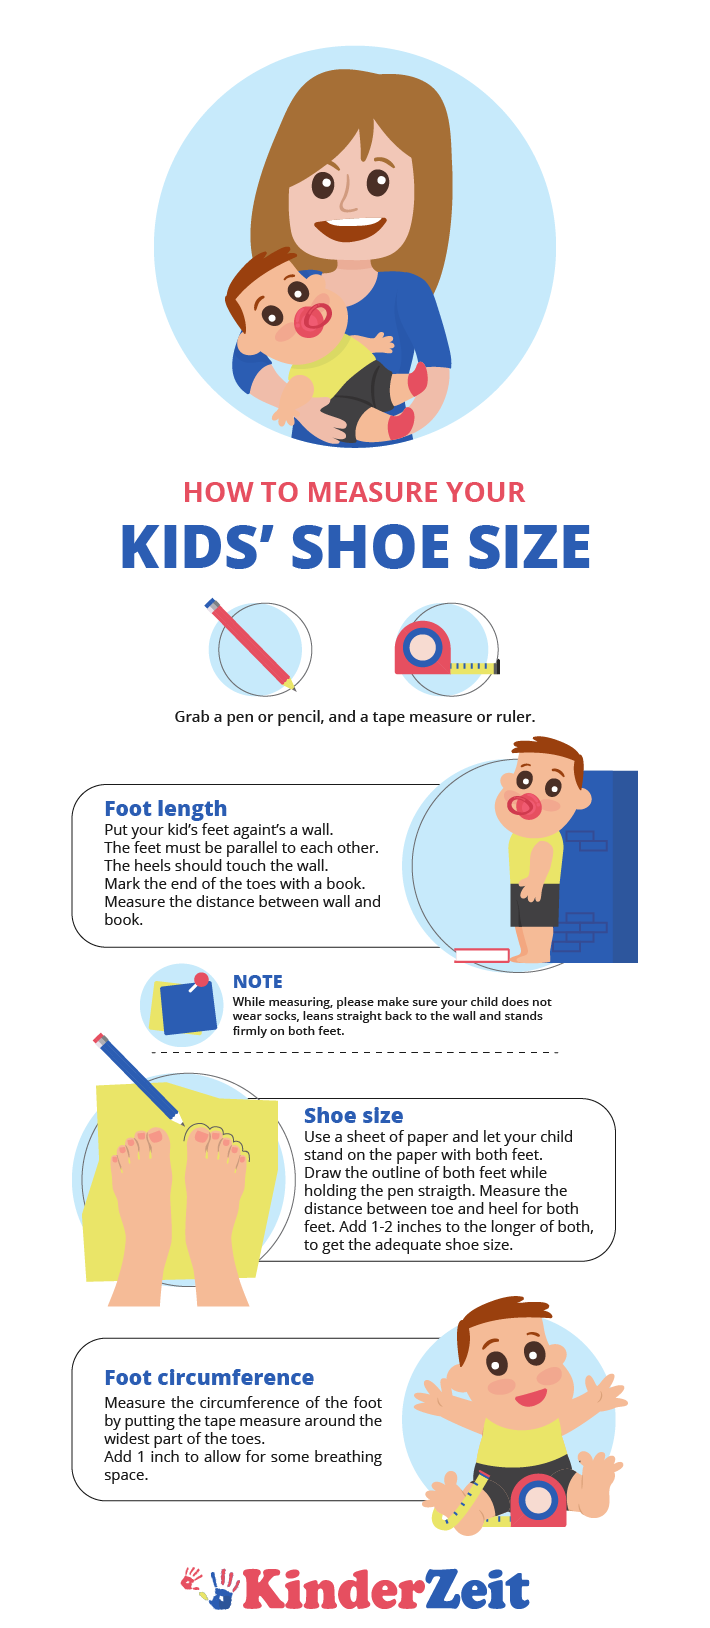 childrens shoe sizes in inches